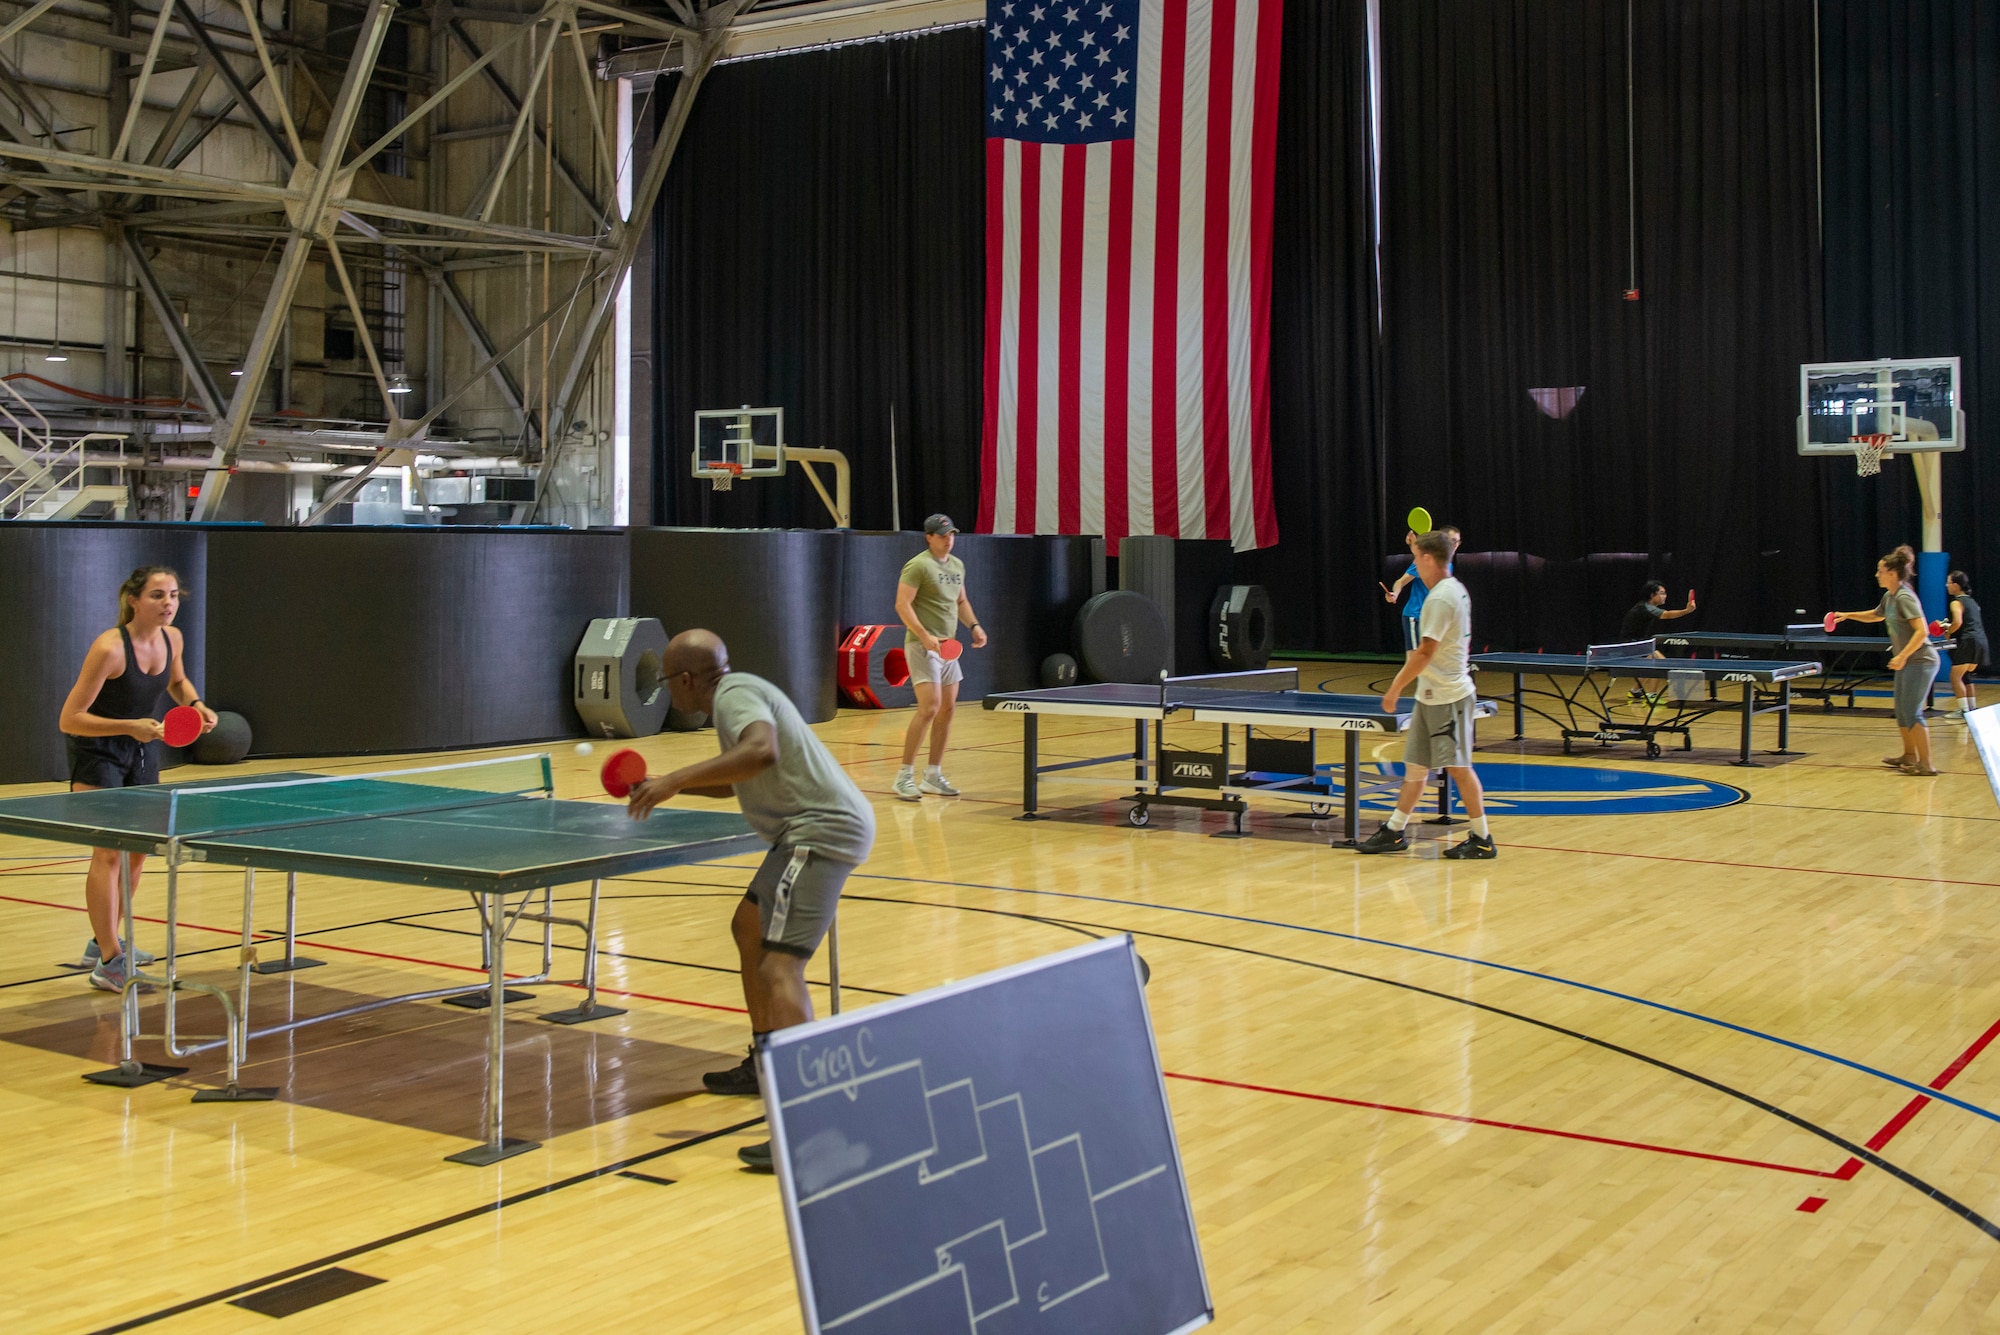 Participants compete in the Ping-Pong tournament at Wright Field Fitness Center.